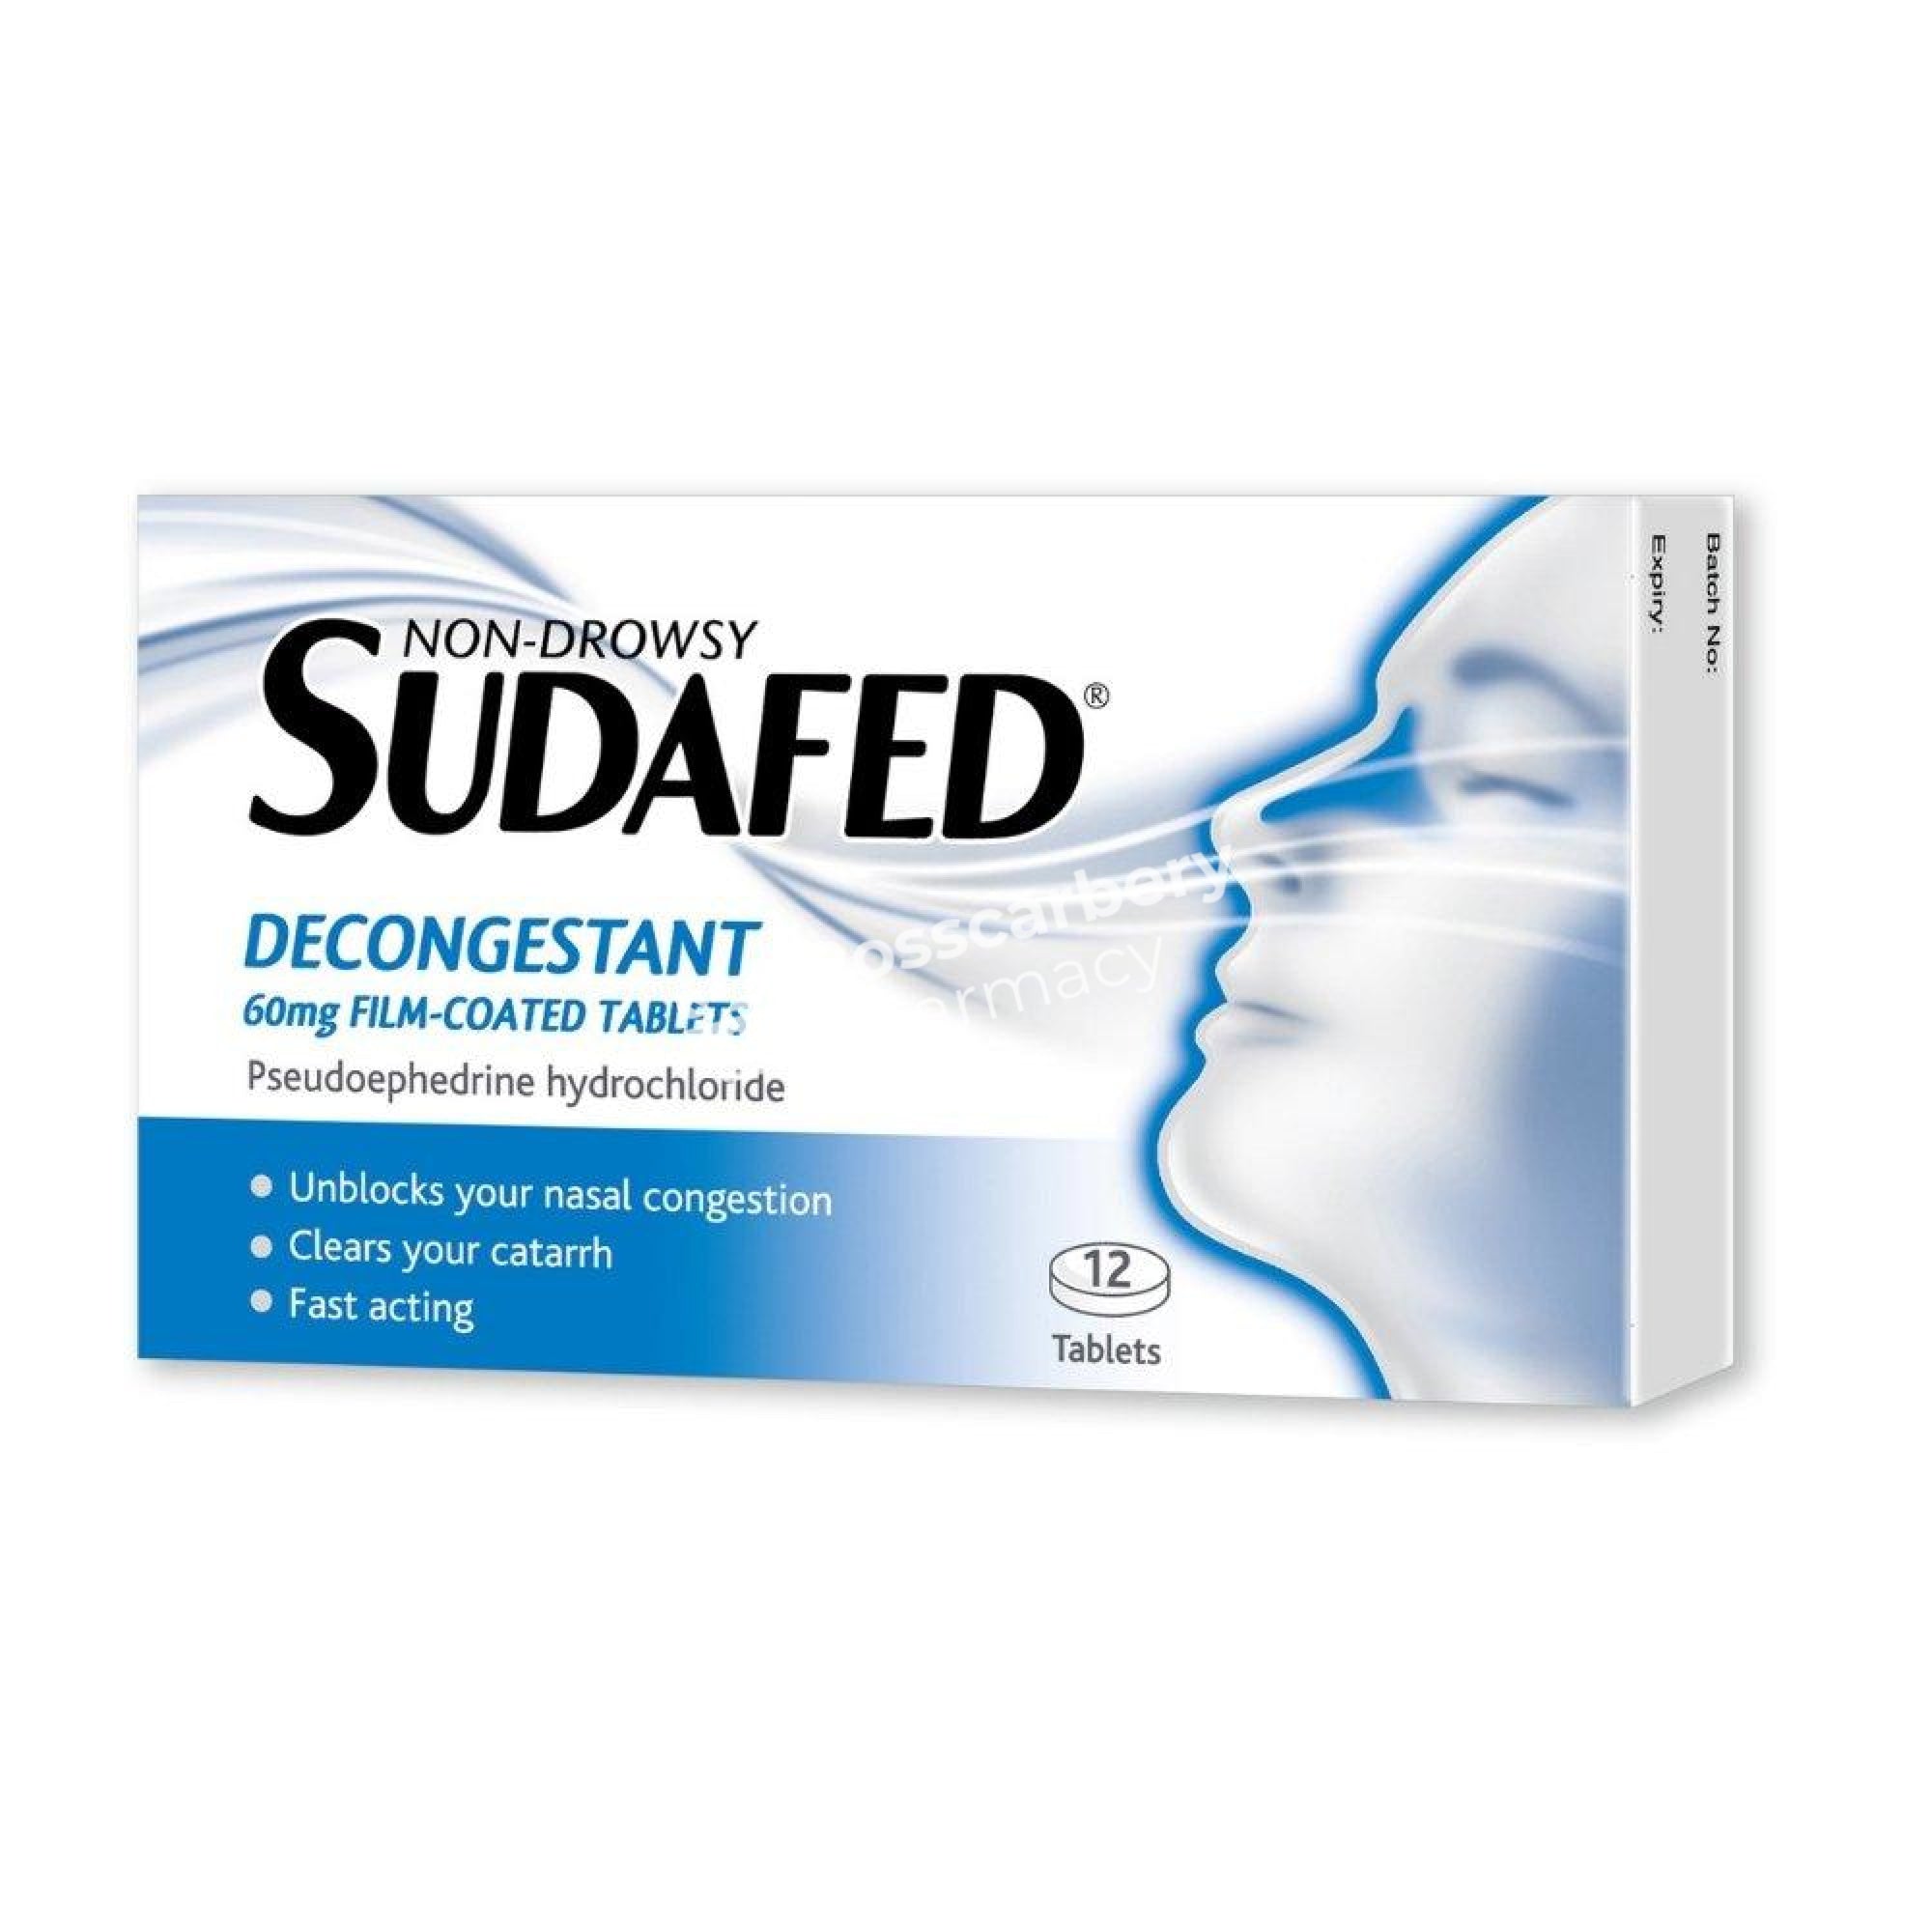 Sudafed Non-Drowsy Decongestant 60Mg Film-Coated Tablets Cold & Flu Combination Products